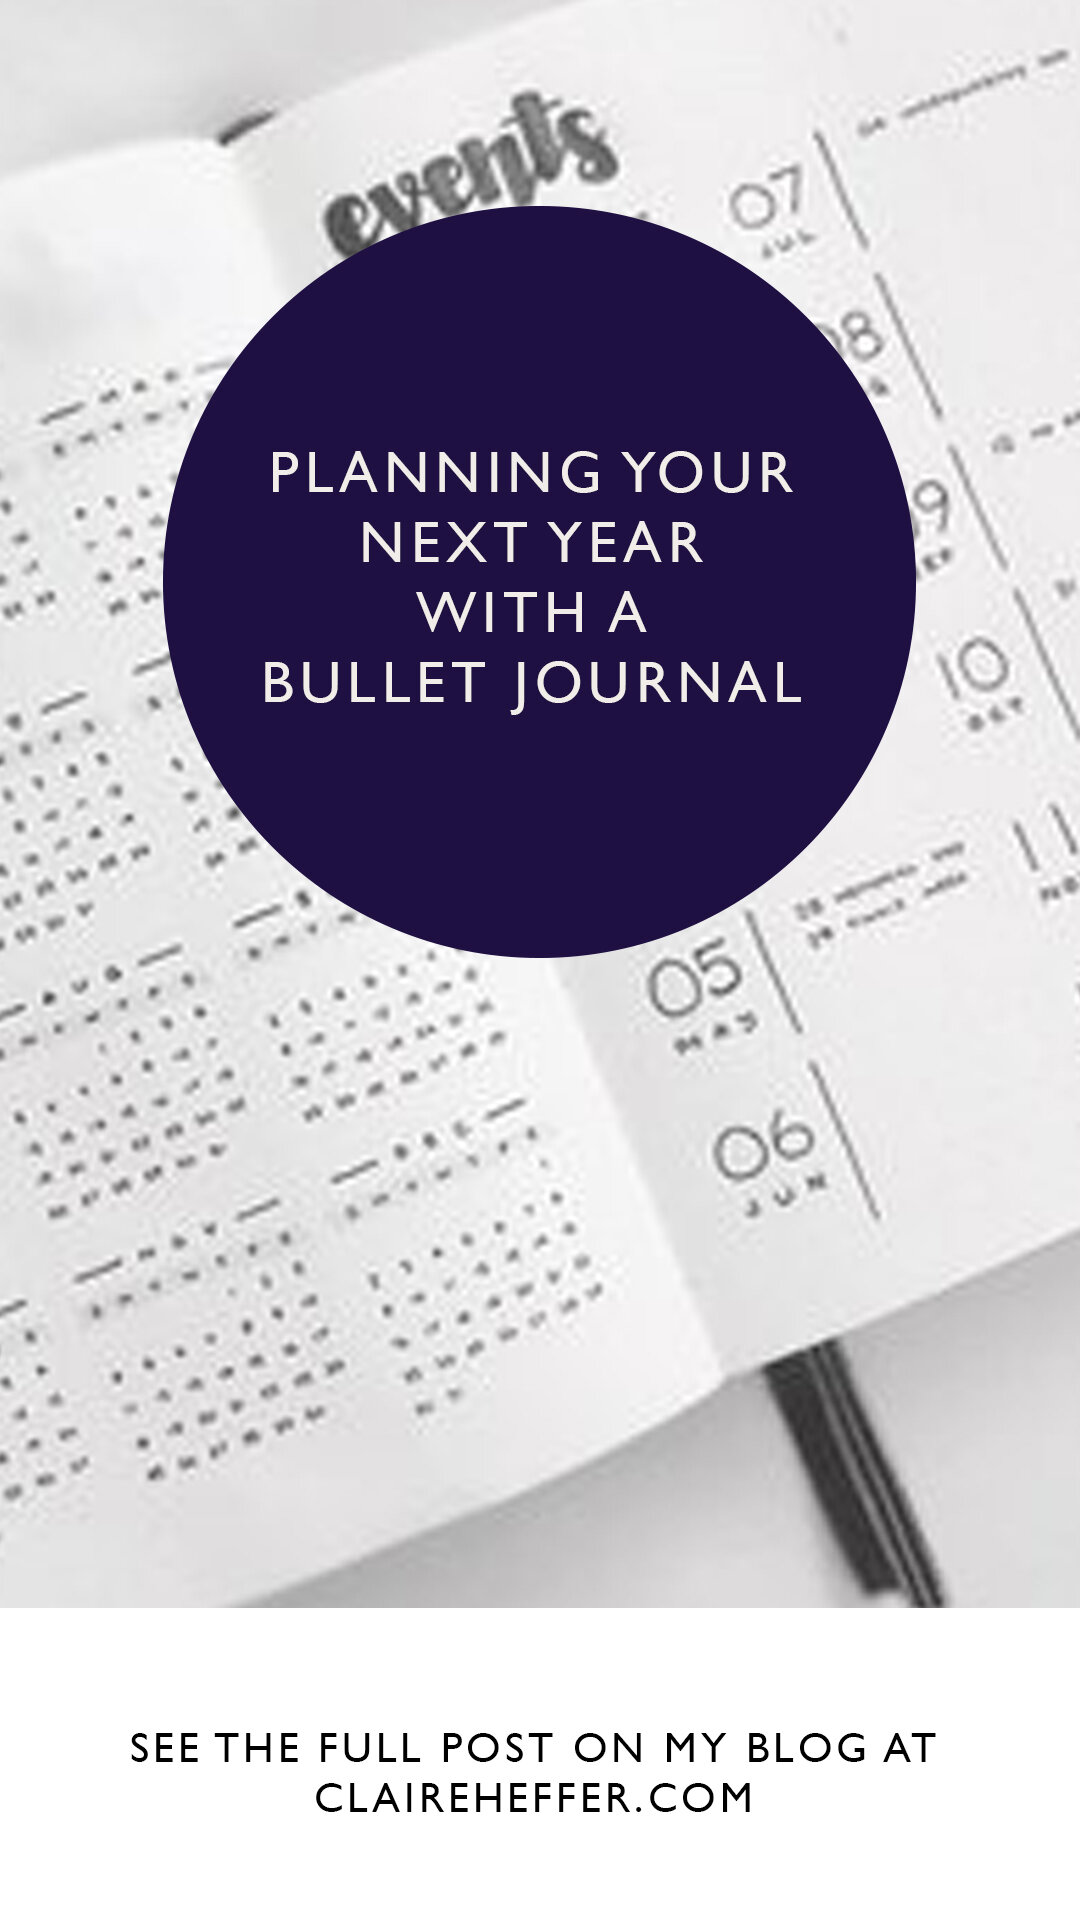 PLANNING YOUR NEXT YEAR WITH A BULLET JOURNAL.jpg